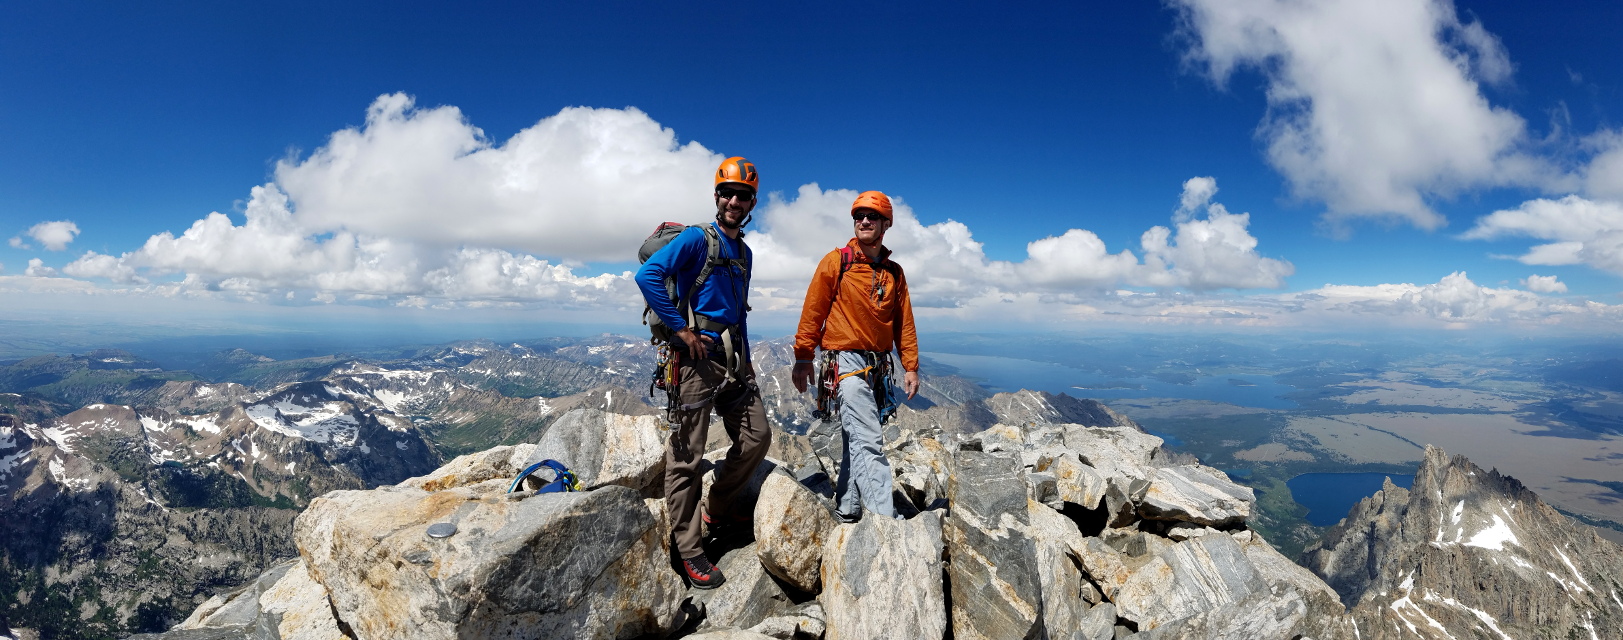 Adam and I on the summit of the Grand Teton (Category:  Rock Climbing)